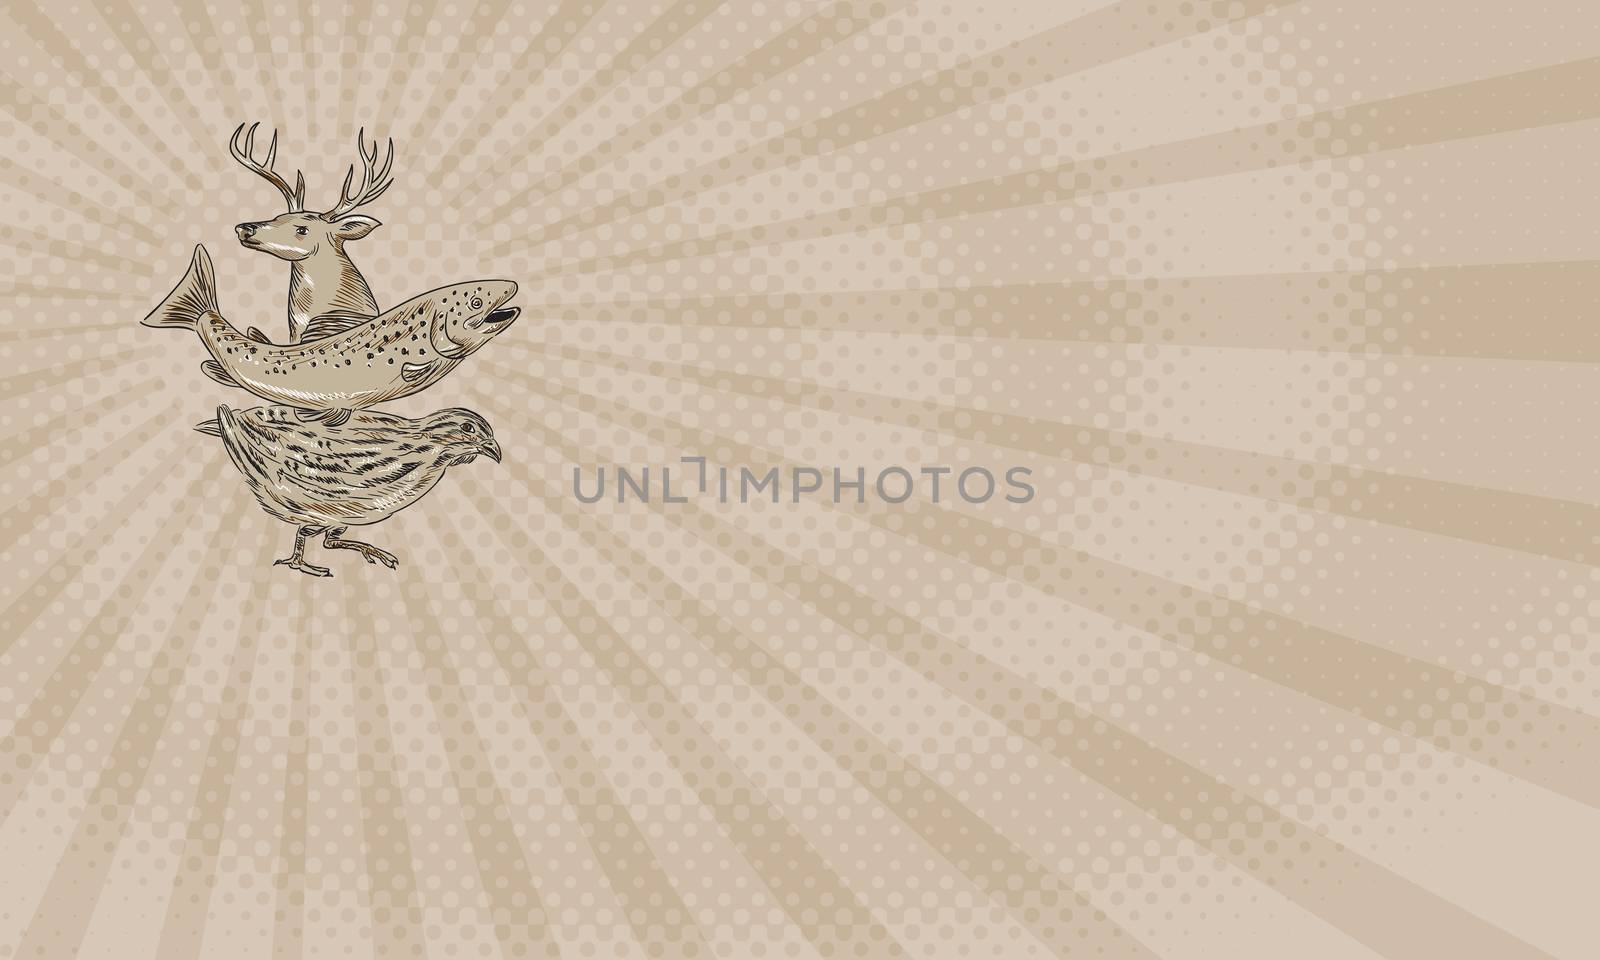 Business card showing Drawing sketch style illustration of a deer, trout and quail viewed from the side.



